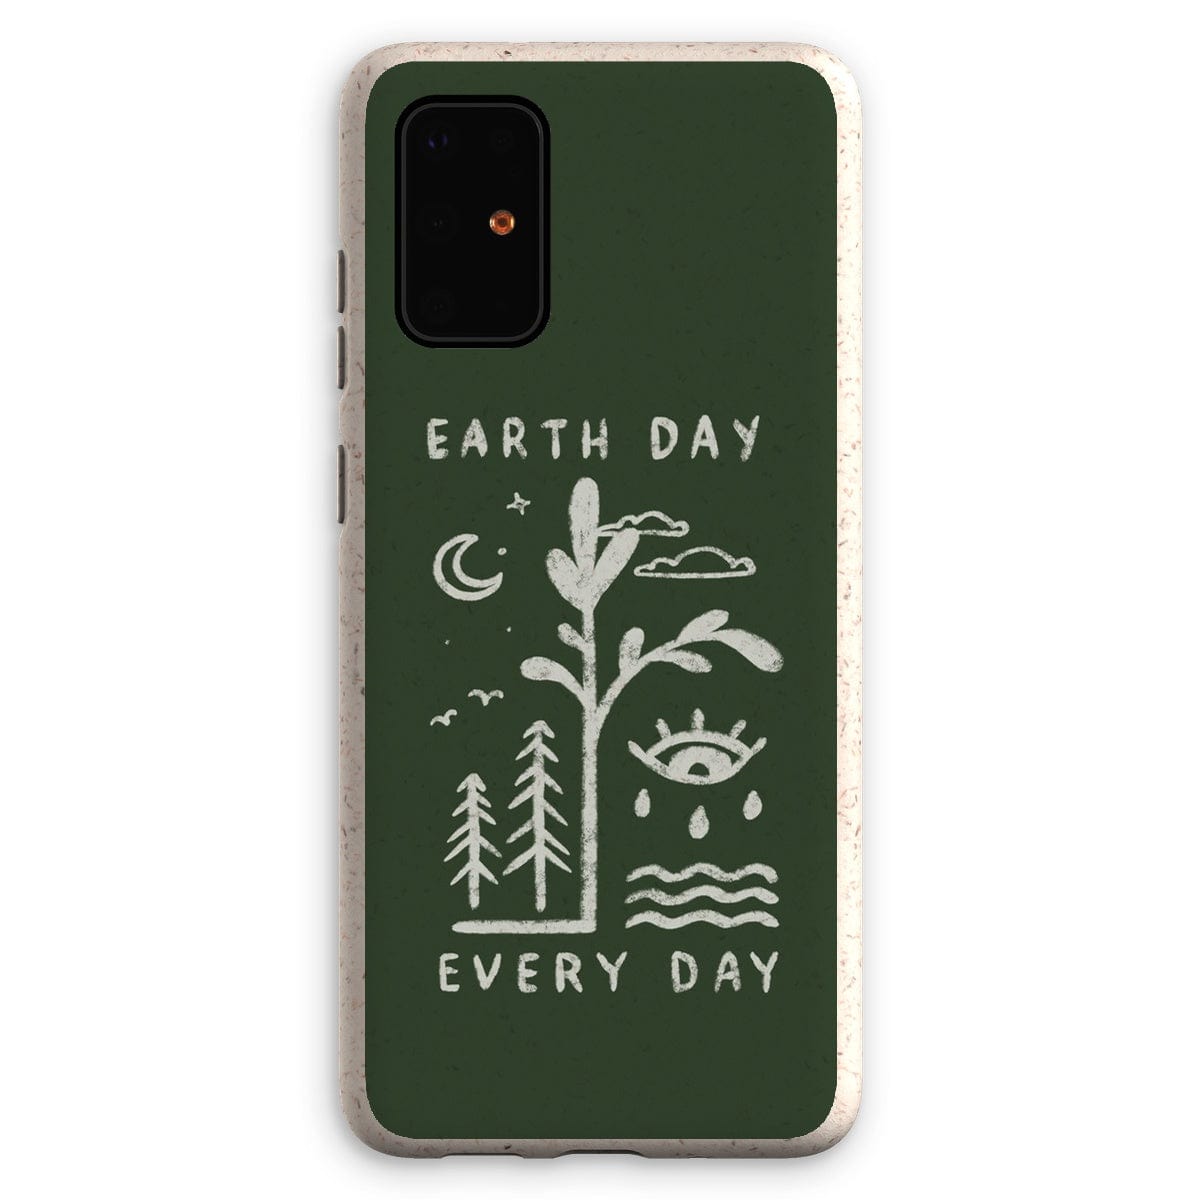 Prodigi Phone & Tablet Cases Samsung Galaxy S20 Plus / Matte Earth Day Eco Phone Case